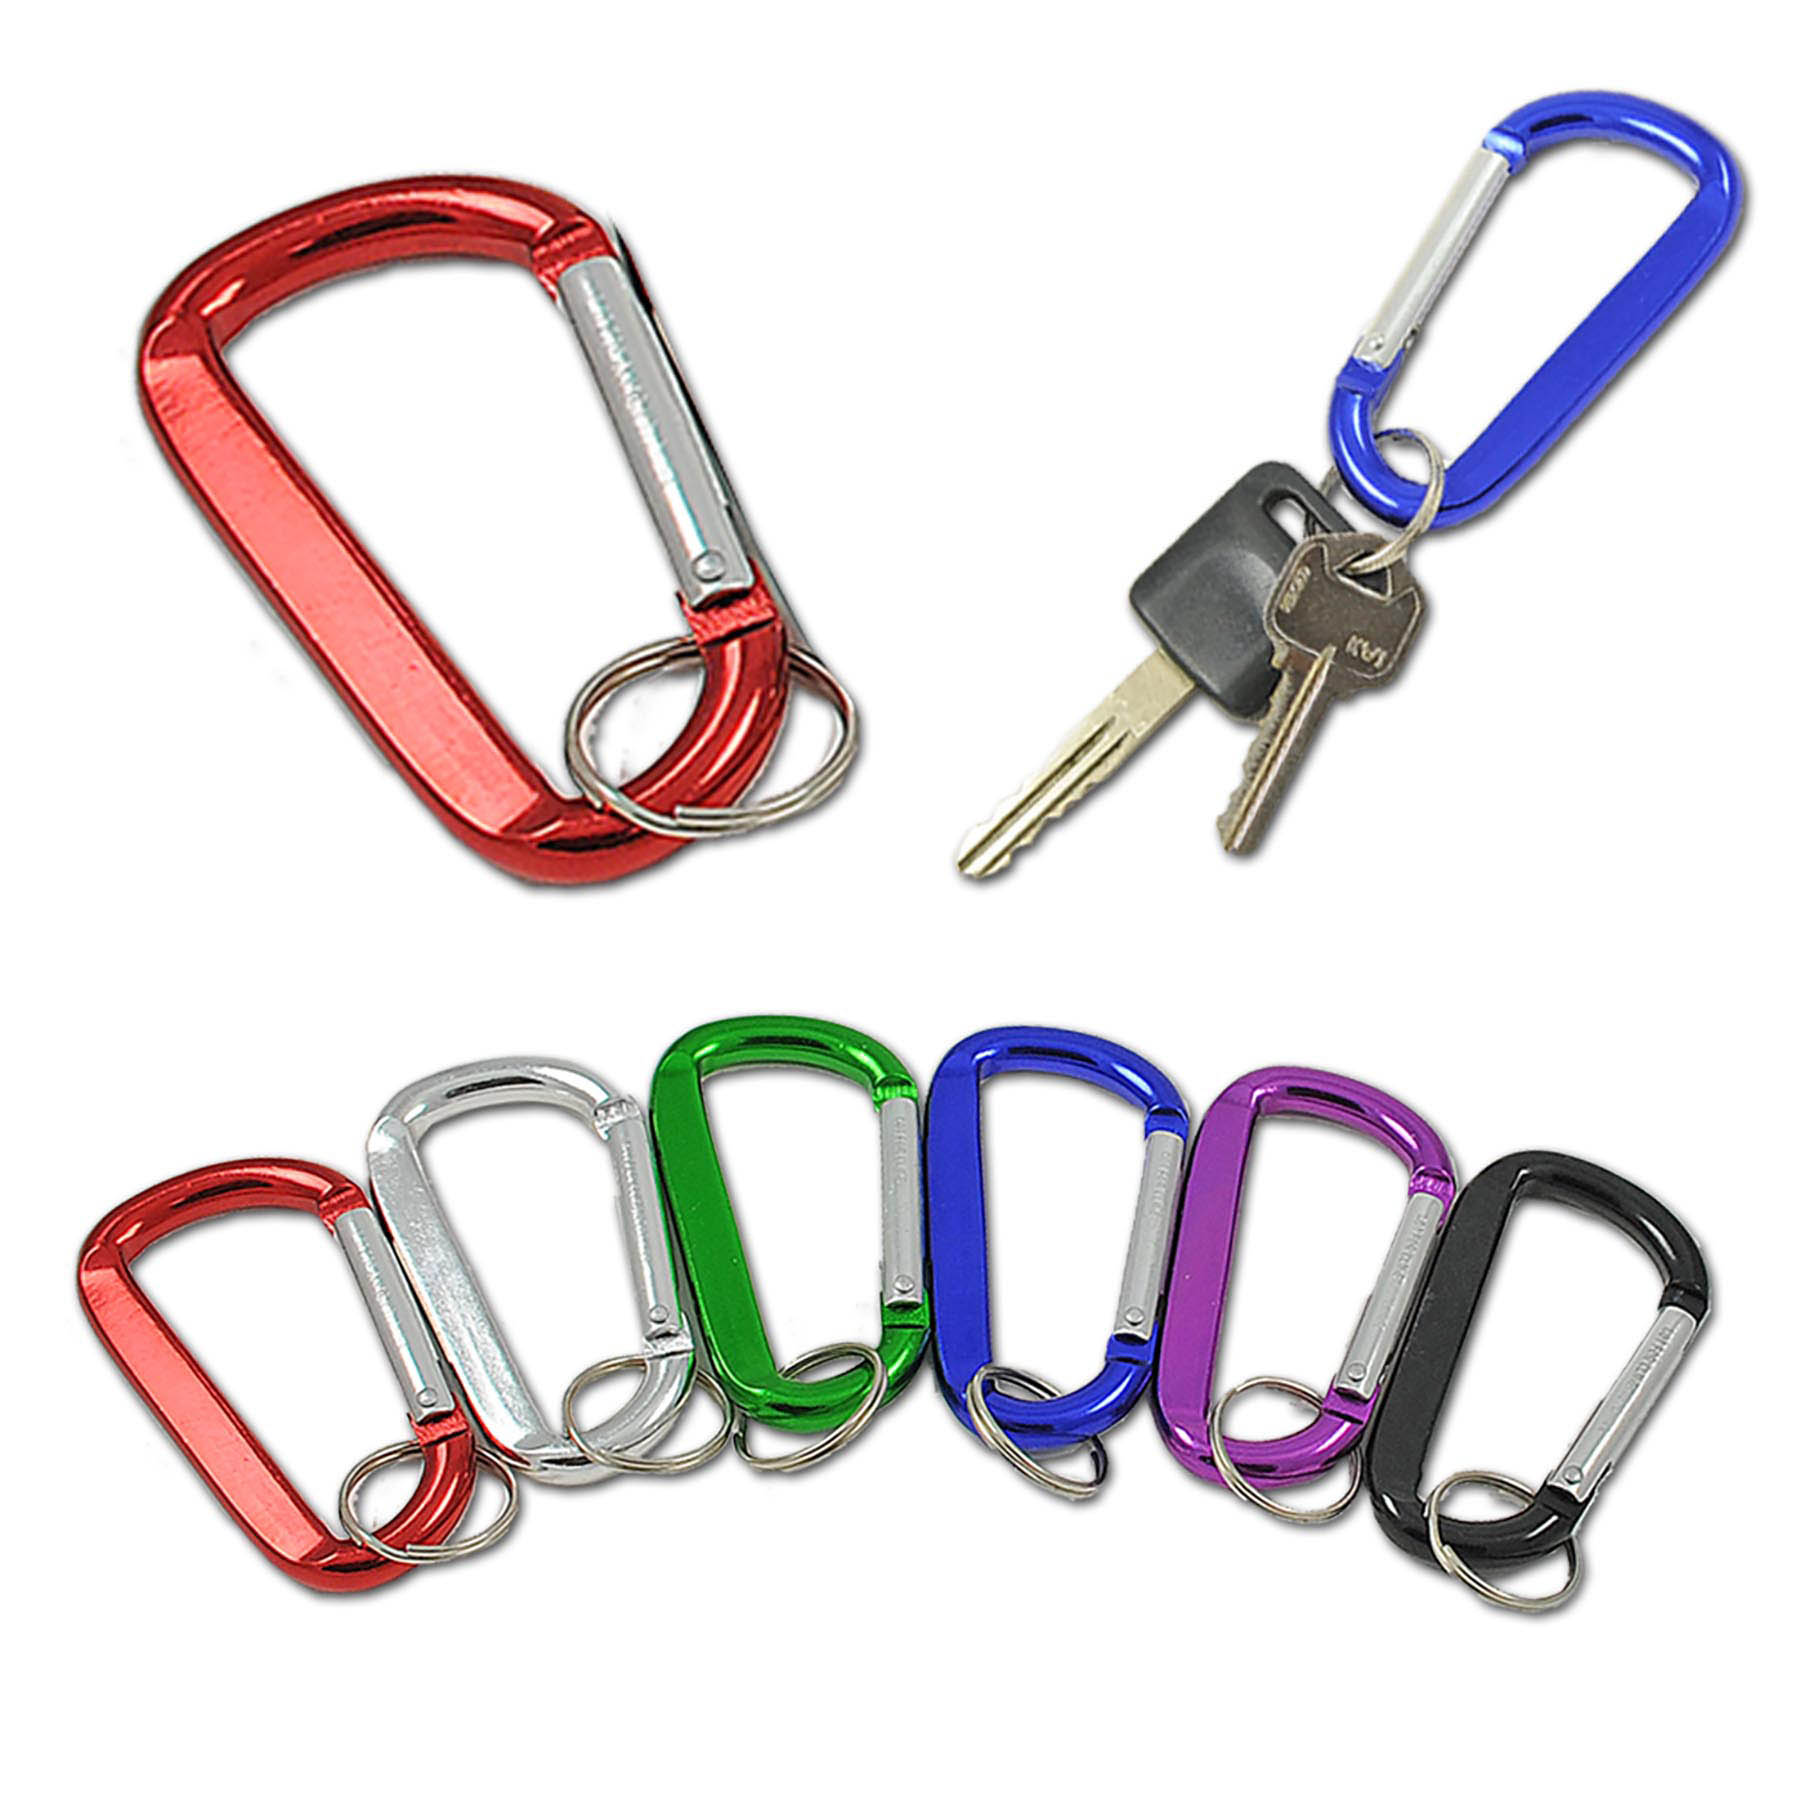 Shawshank LEDz - All Products - 3 Carabiner with Key Ring